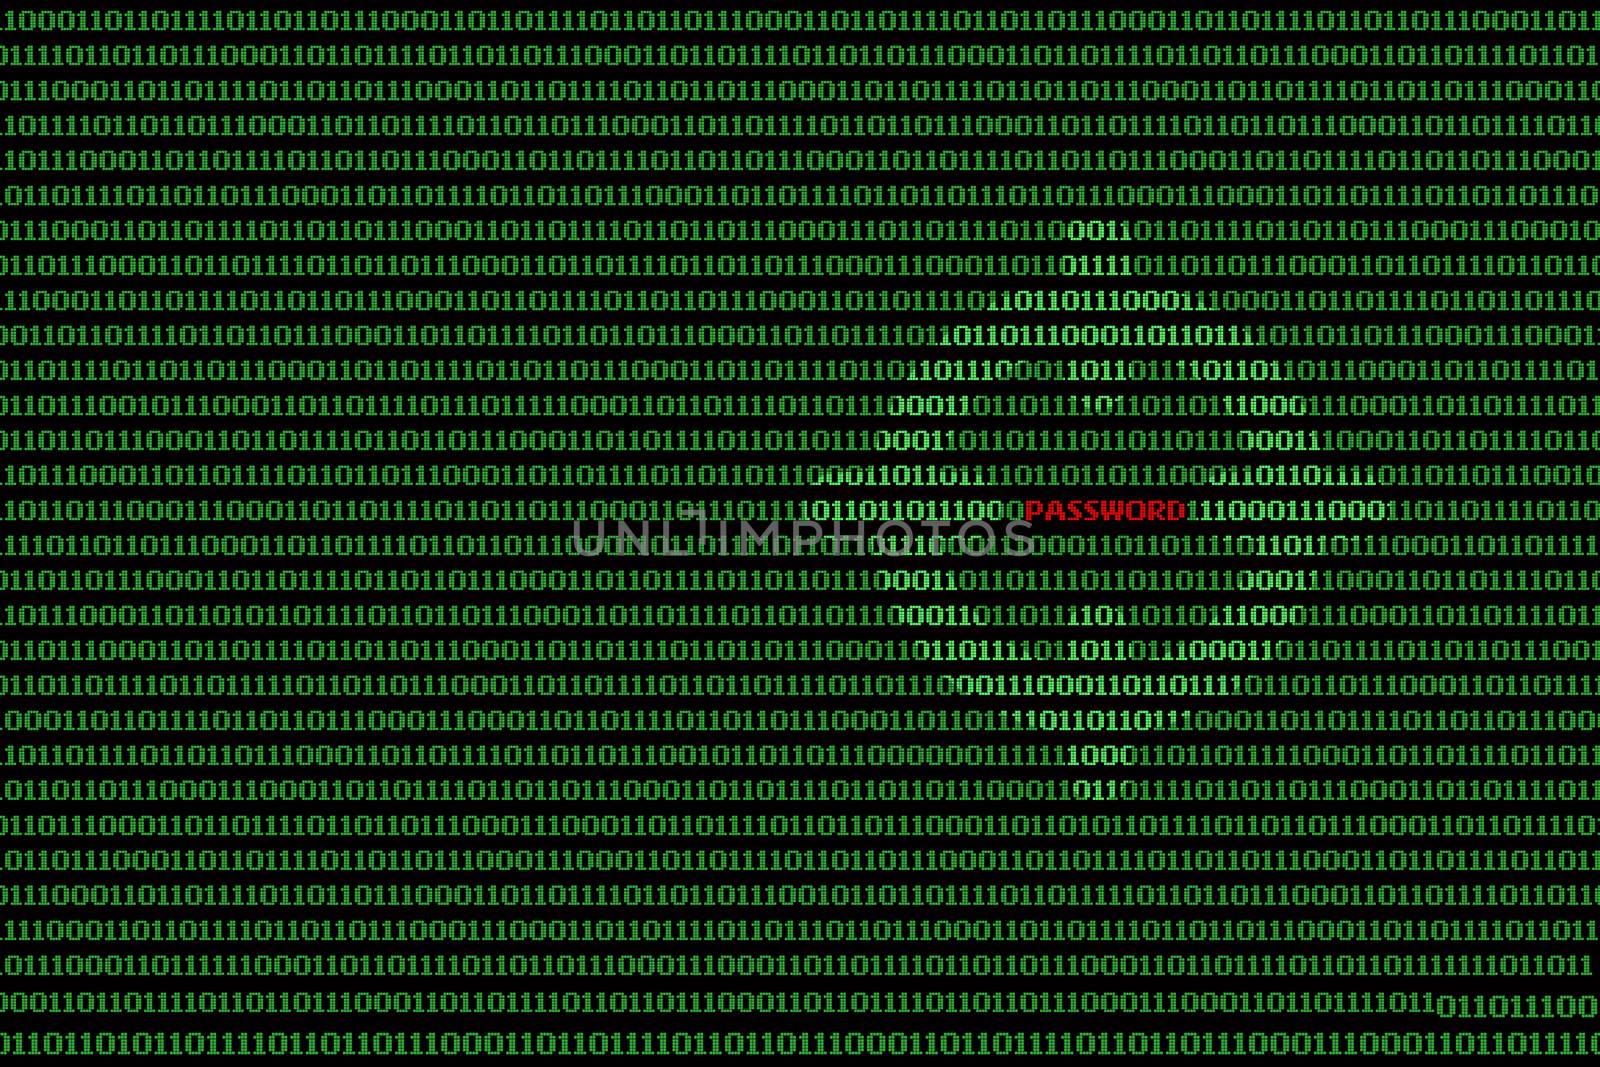 Binary computer code background, with red password and crosshairs.